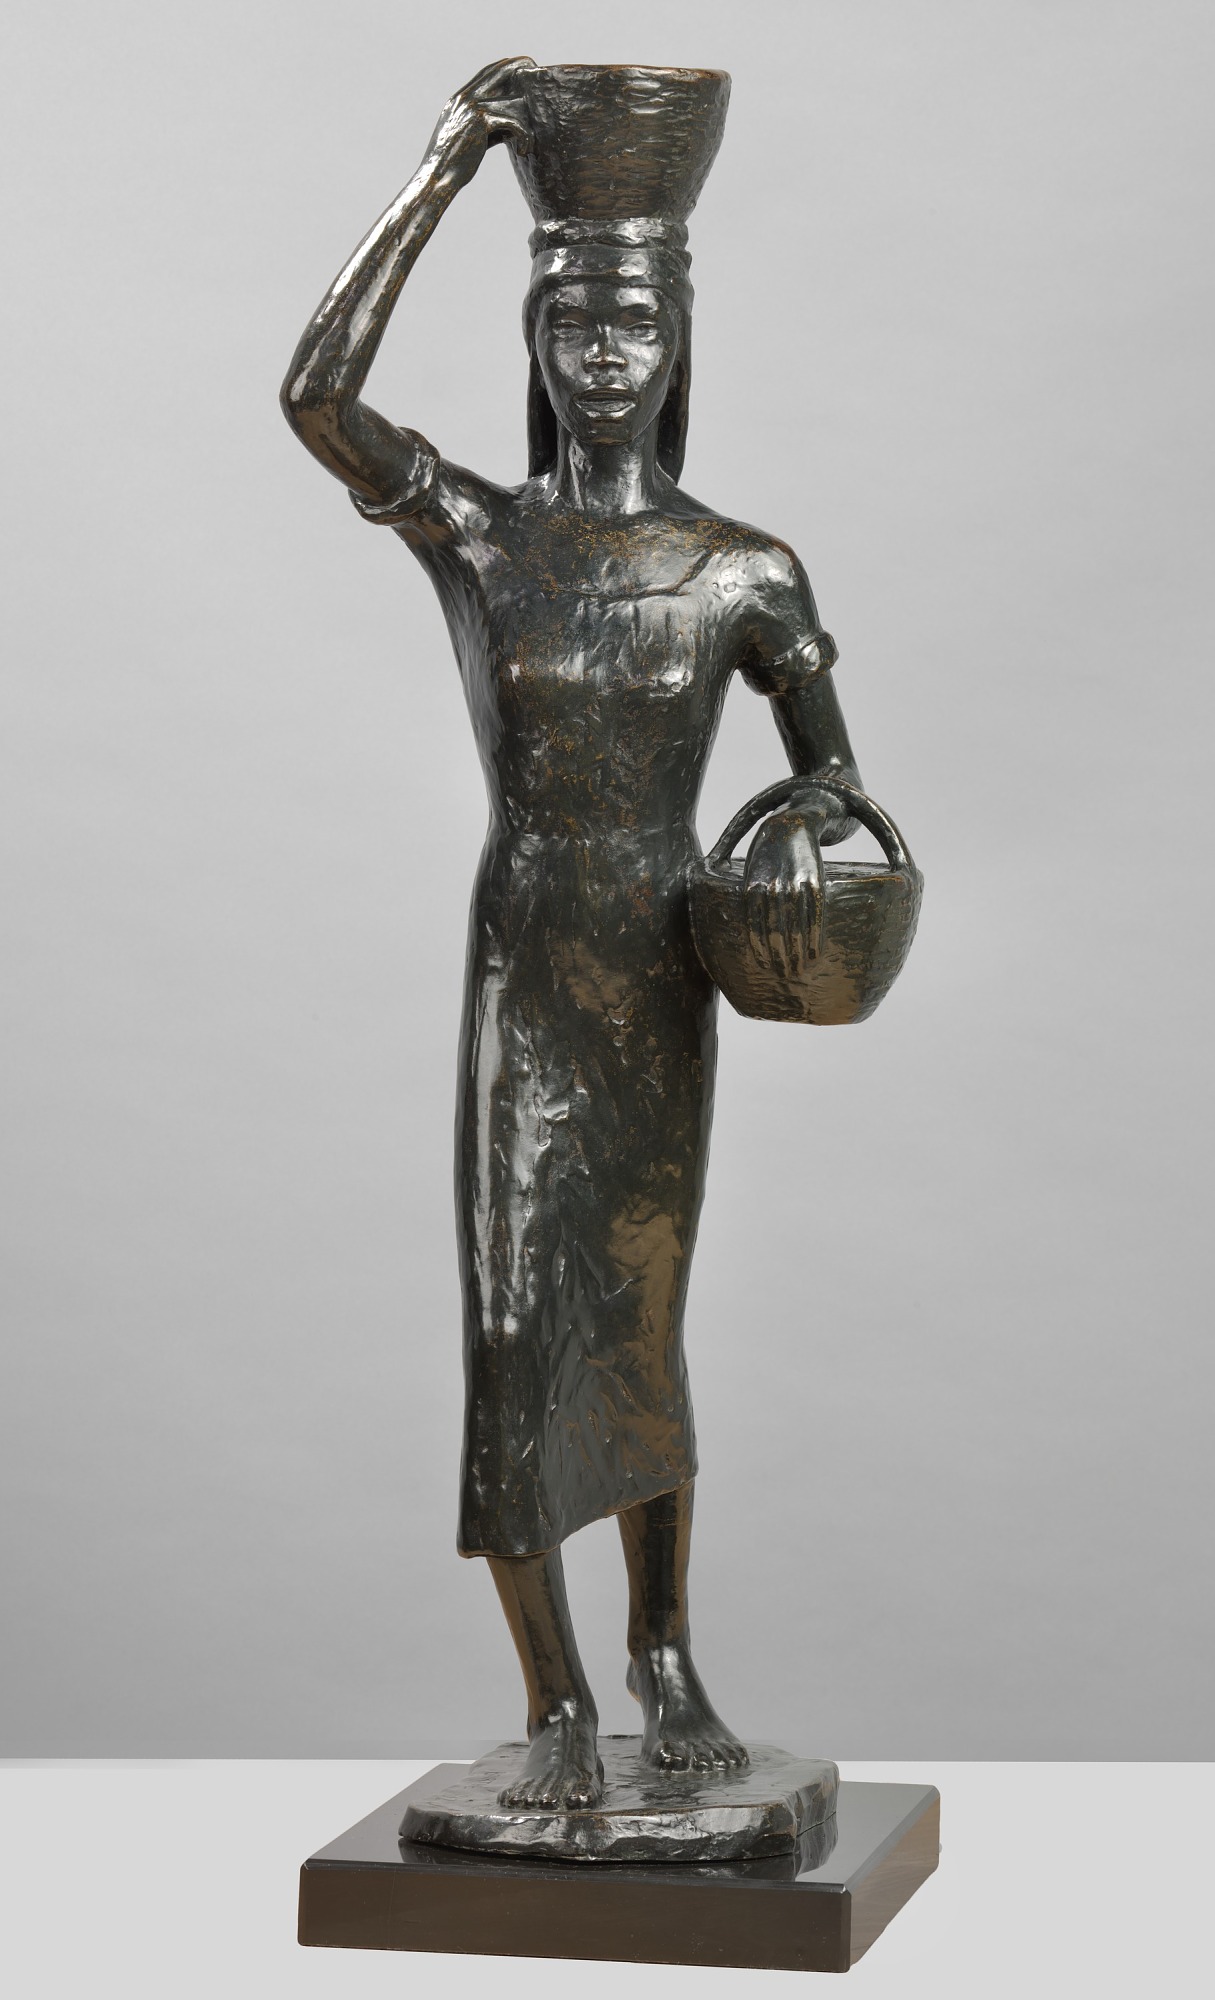 A bronze statue of a woman carrying a basket and another one on her head